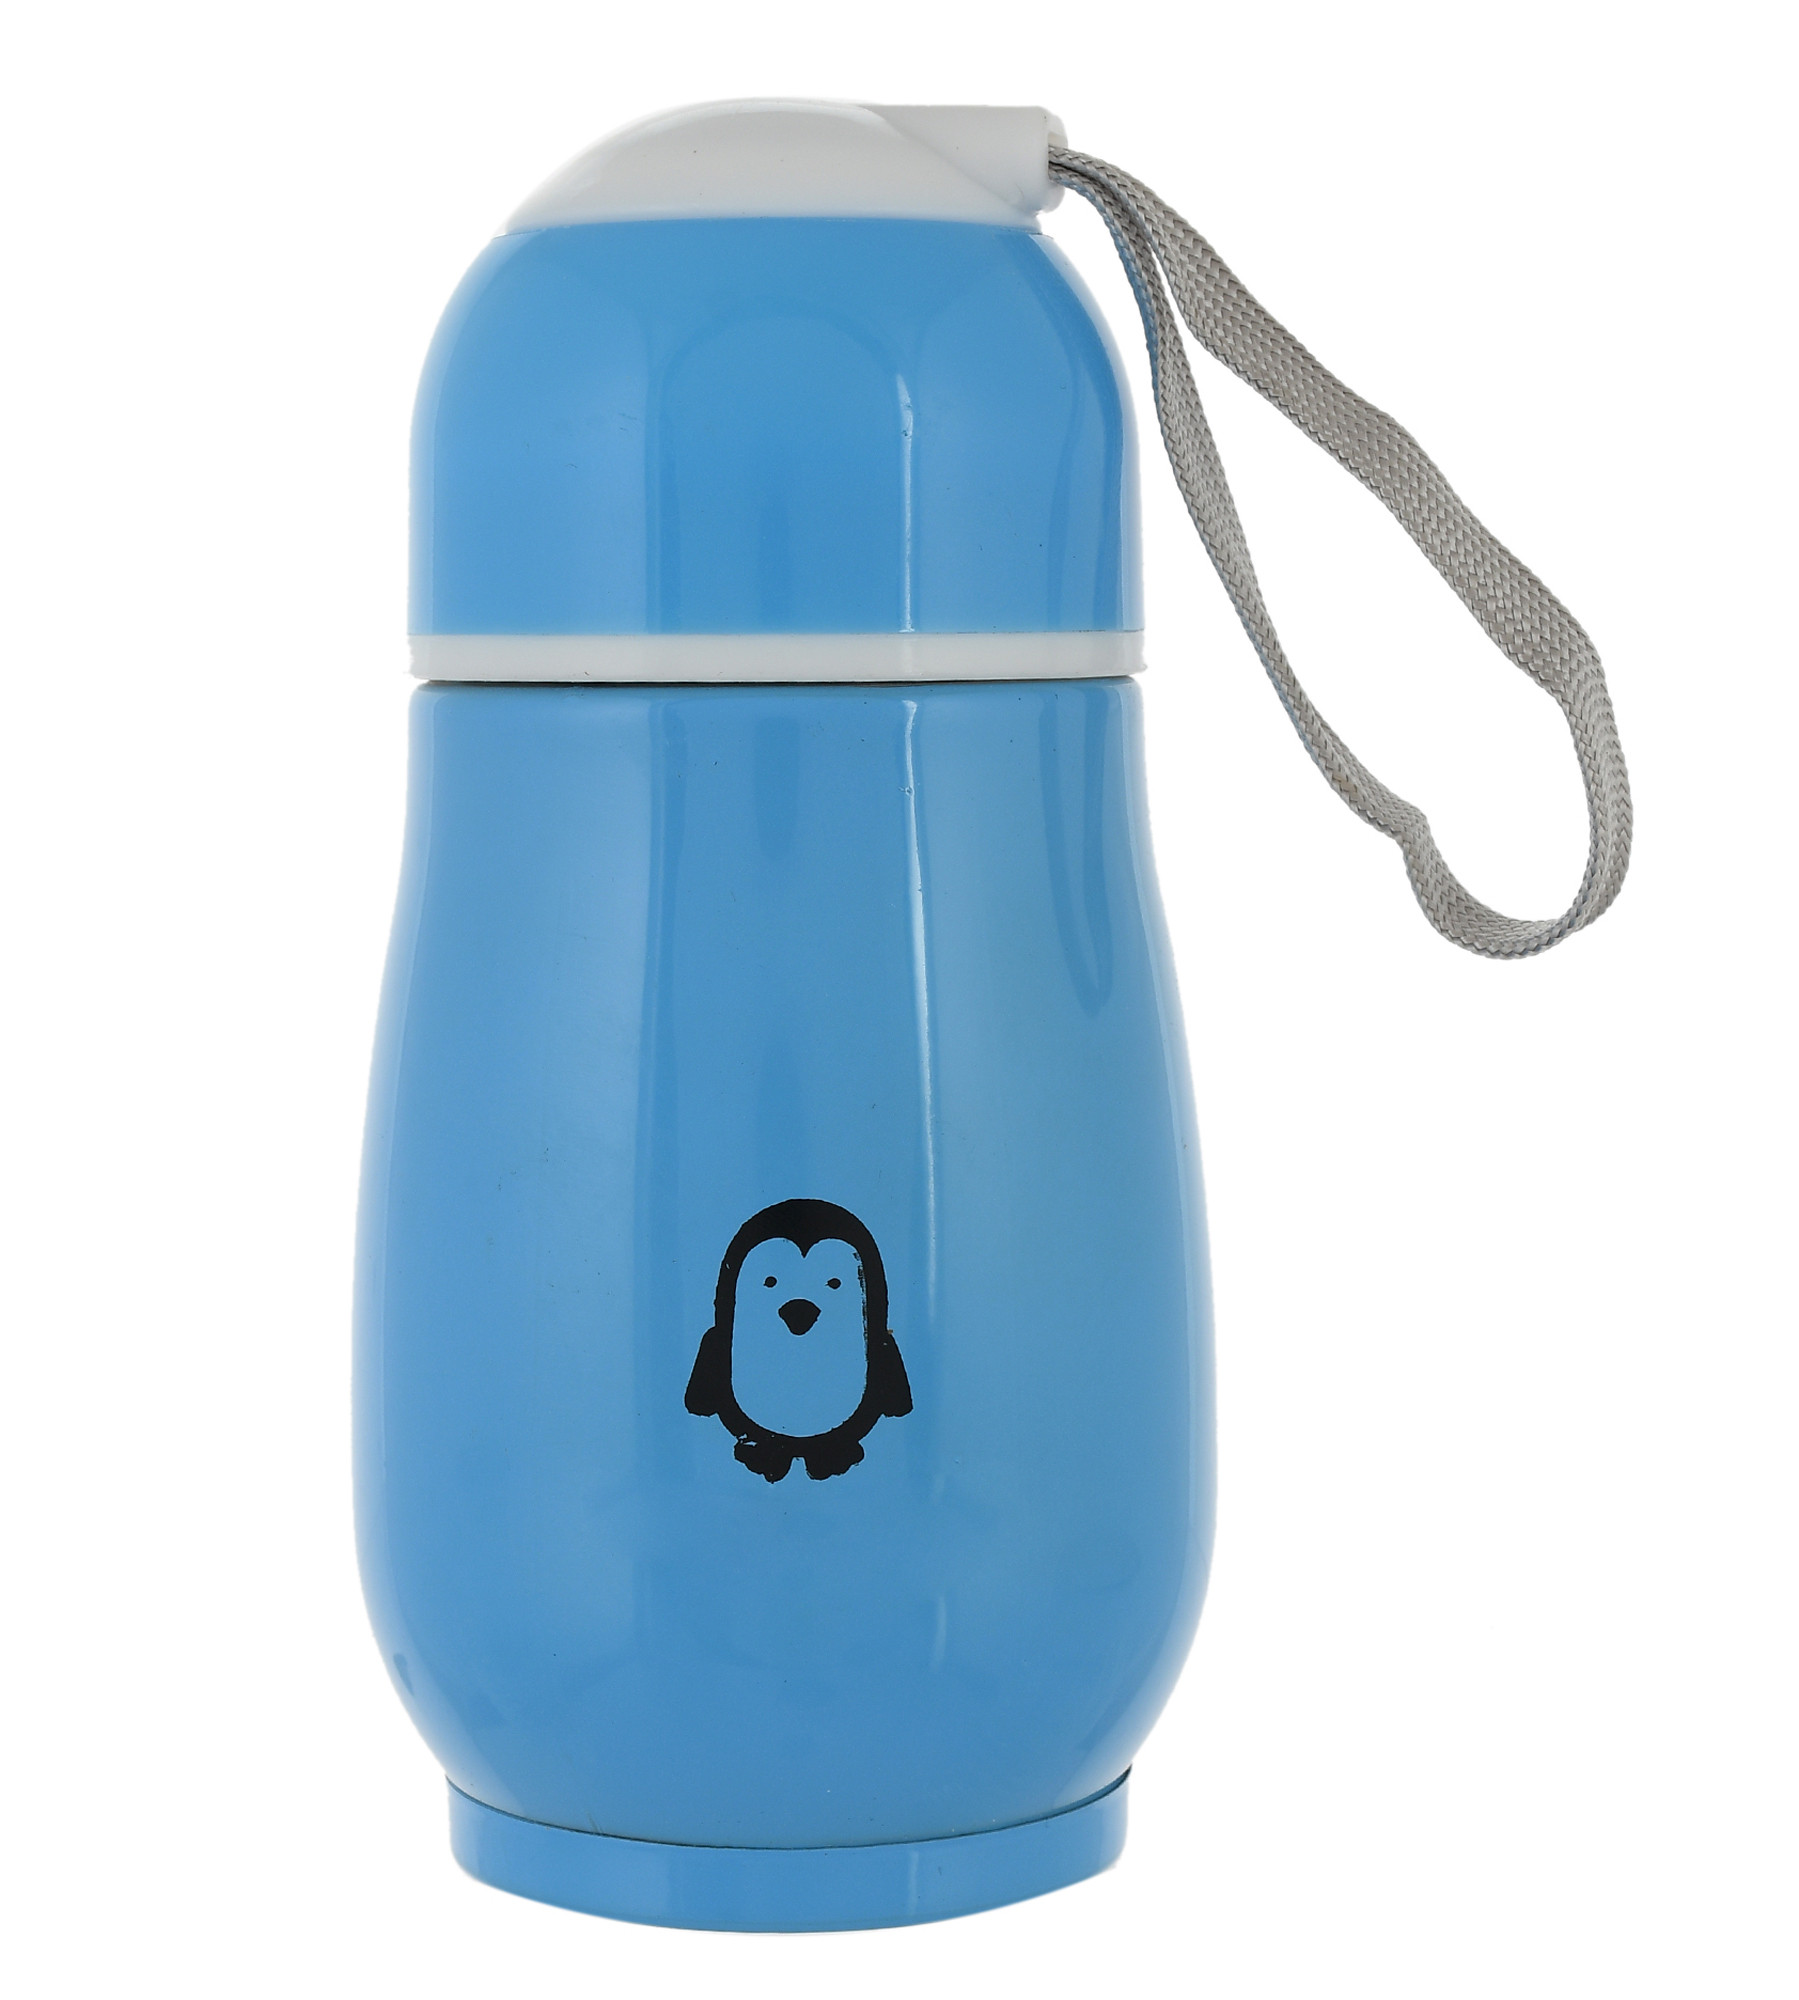 Kuber Industries Small Stainless Steel Hot & Cold Vacuum Thermos Travel Mug Tea Water Bottle Coffee Flask, 300ml (Sky Blue)